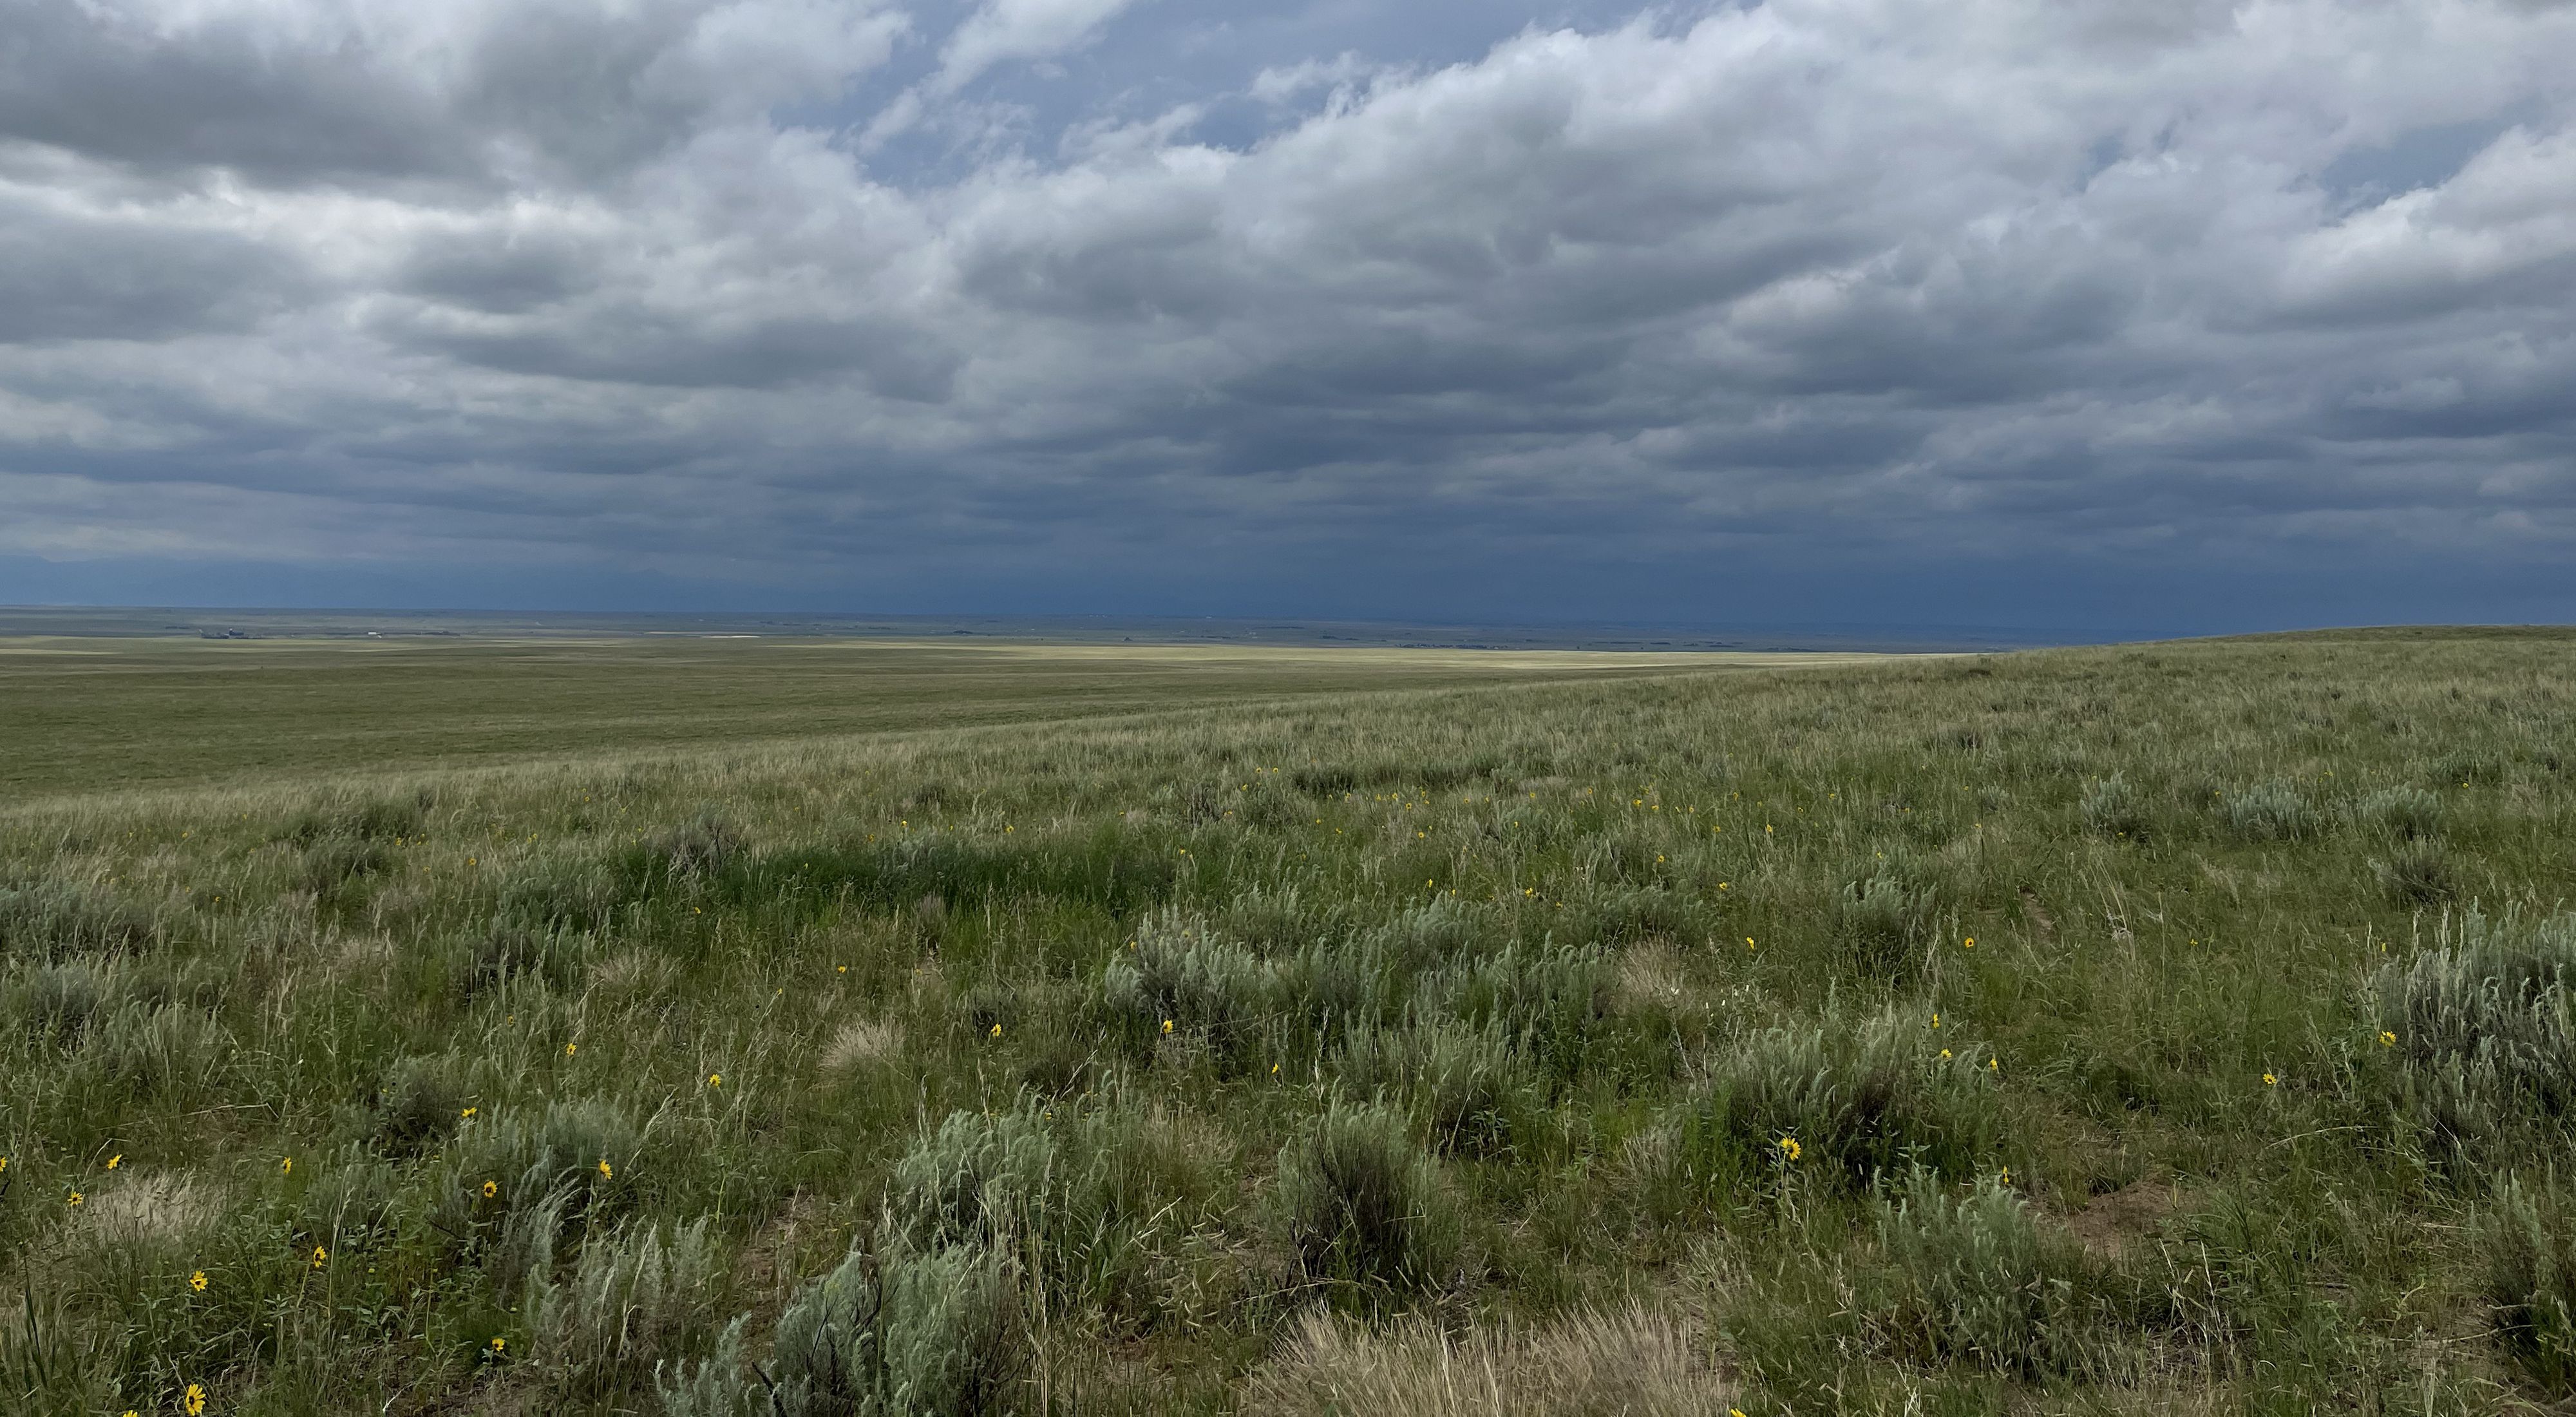 Vast grasslands with large clouds in the sky.